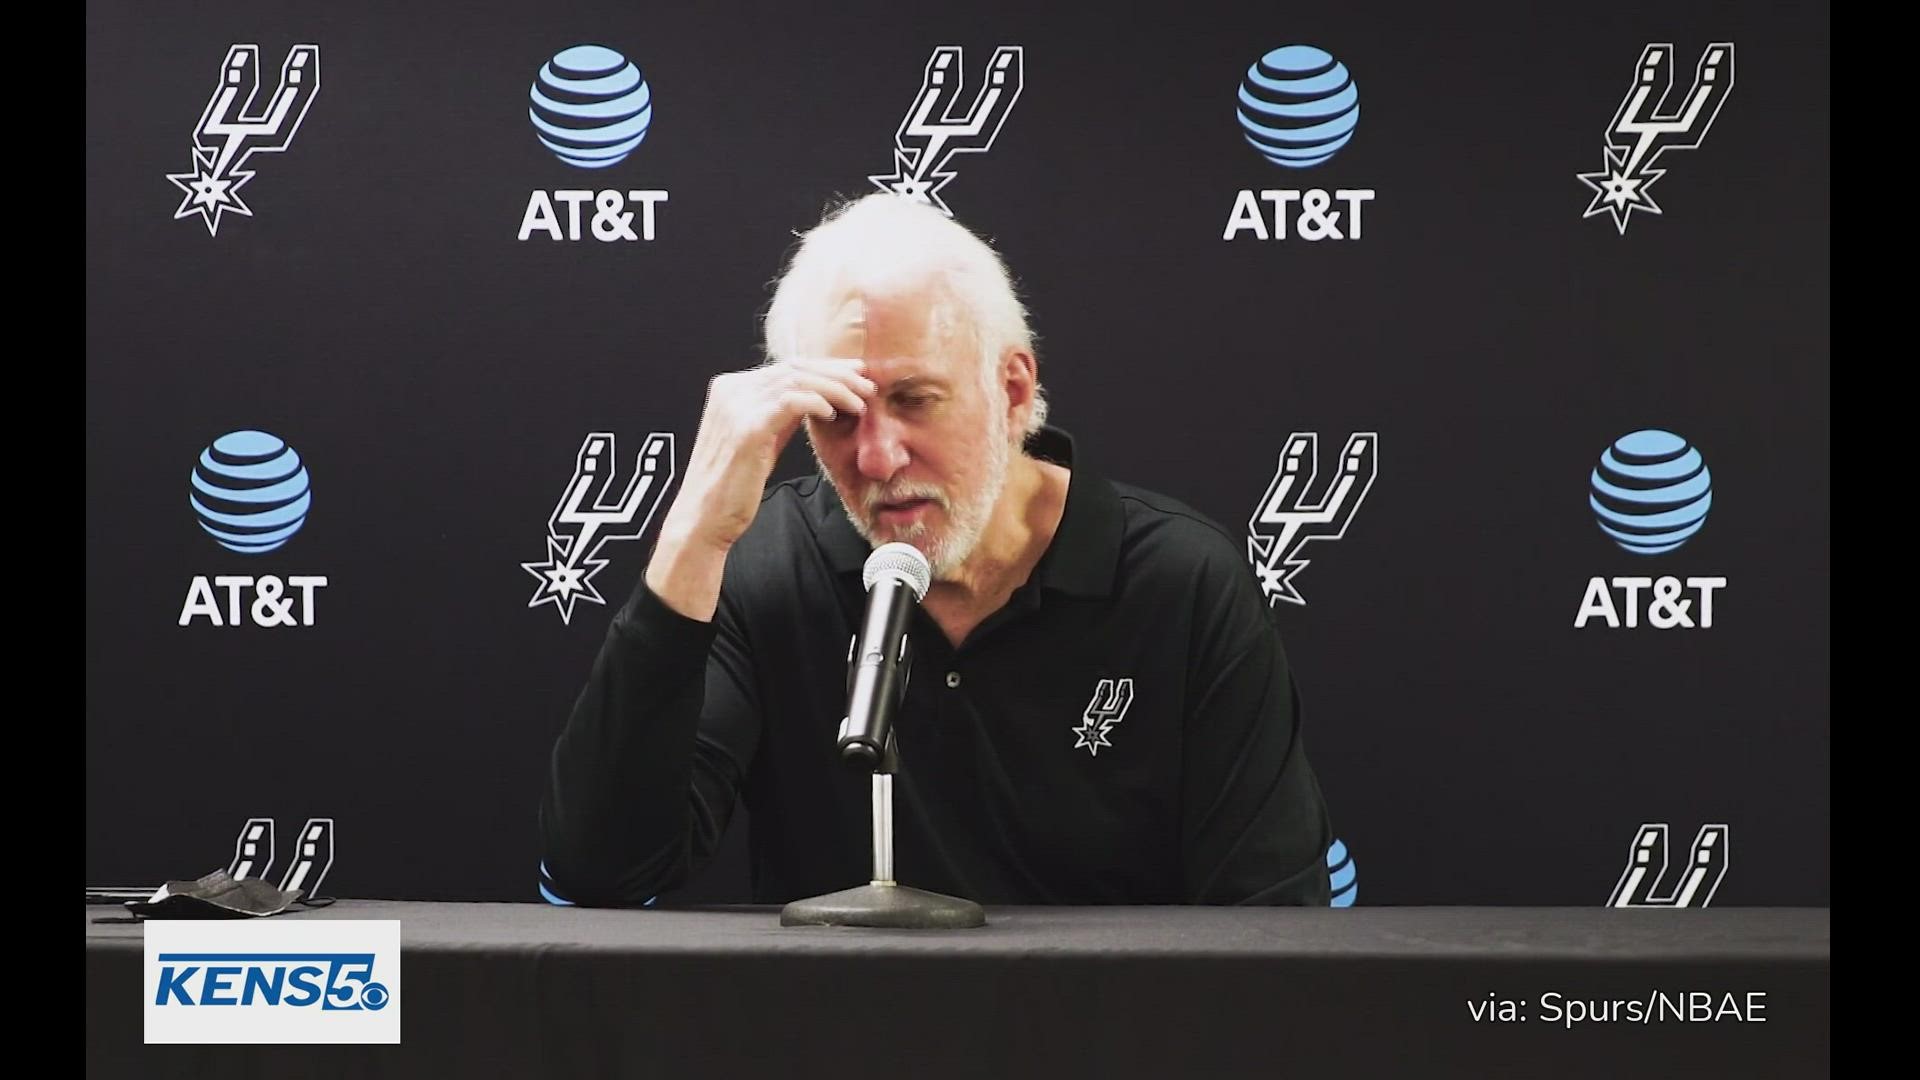 Ahead of Friday's Spurs-Heat preseason matchup, head coach Gregg Popovich took exception to some San Antonio school districts that still honor Columbus Day.